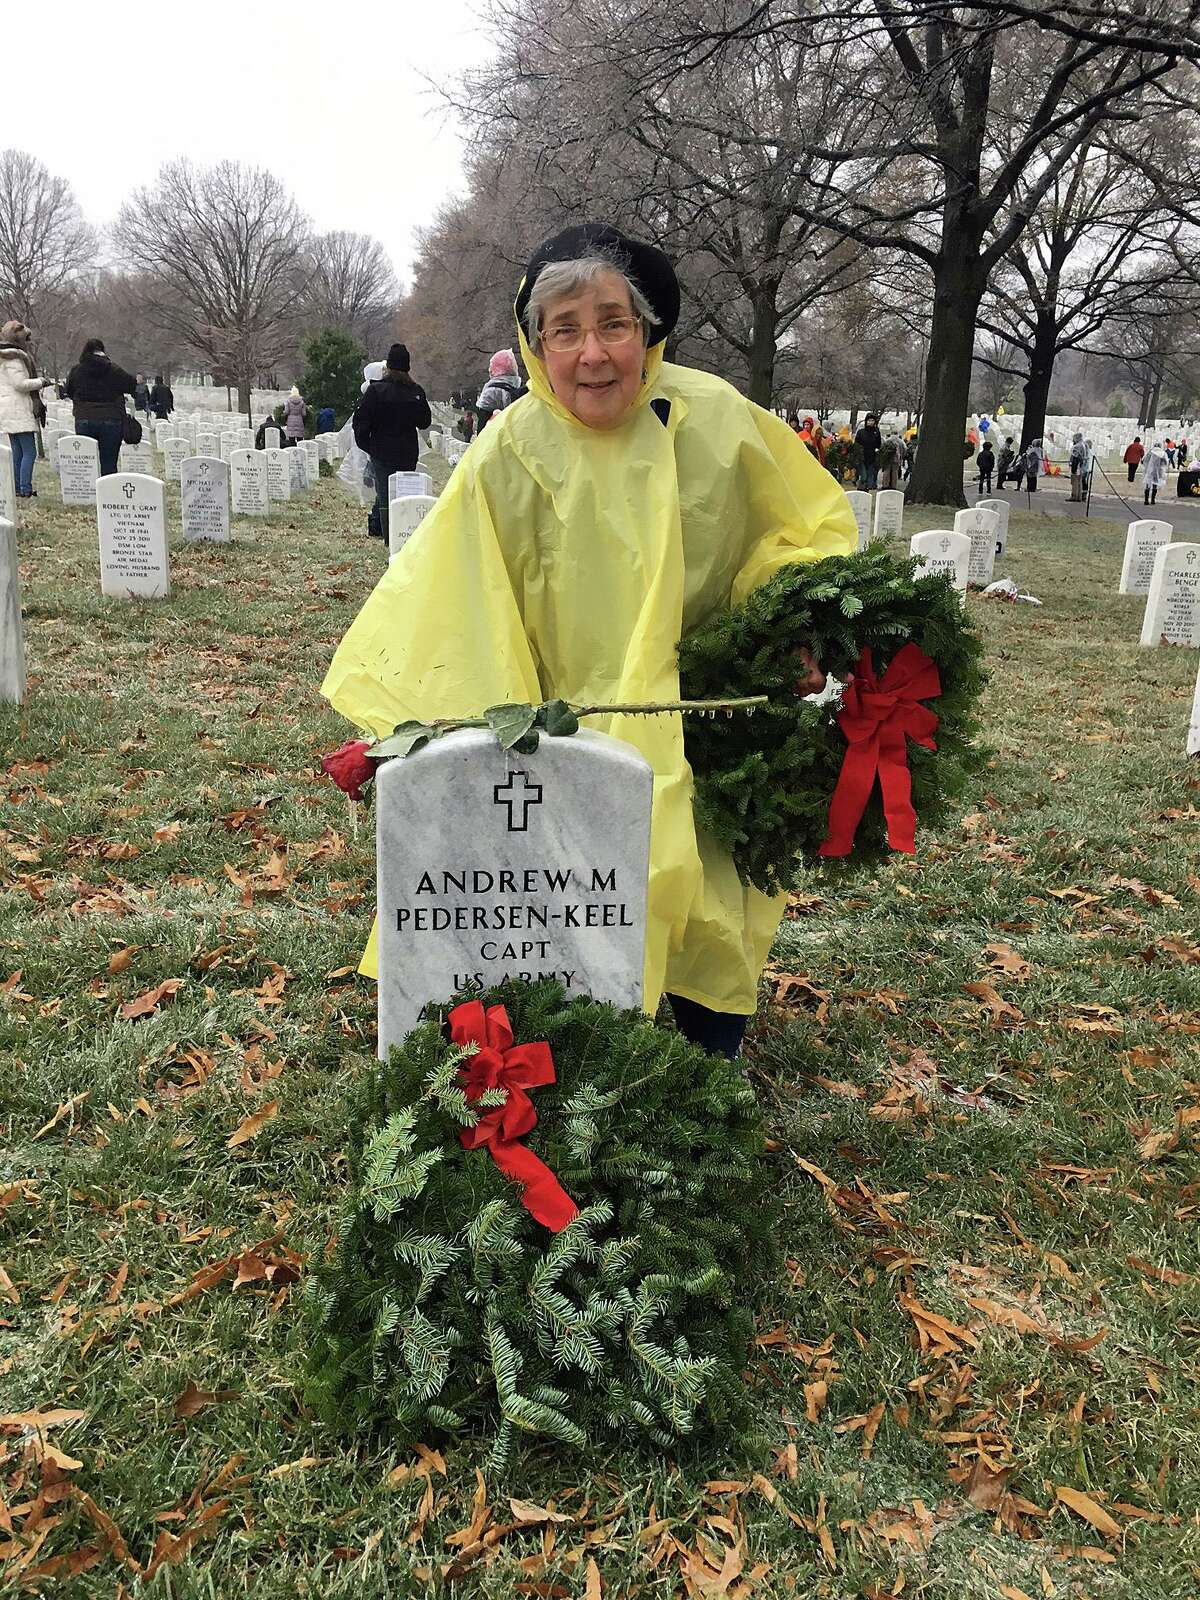 Barbara “Bobbi” Racette laying wreaths at Arlington National Cemetery as part of the Wreaths Across America movement